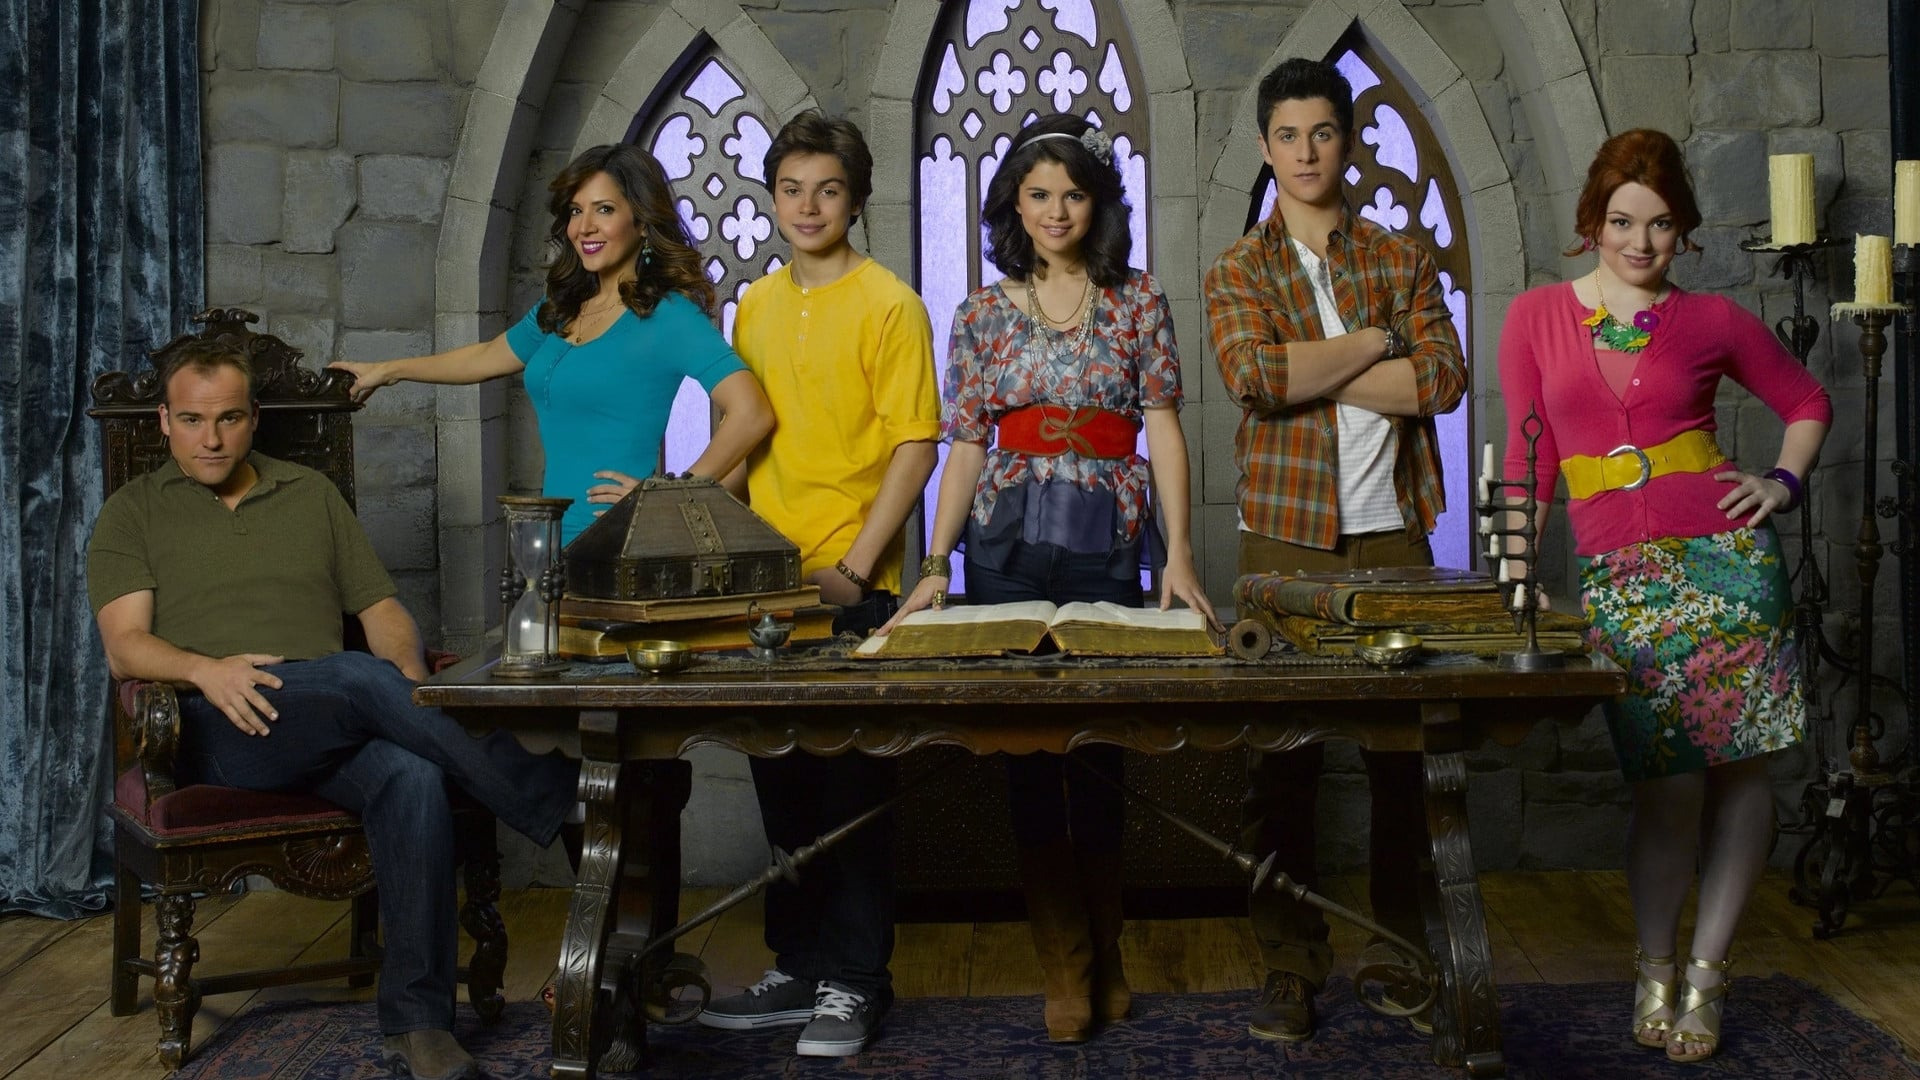 Show Wizards of Waverly Place